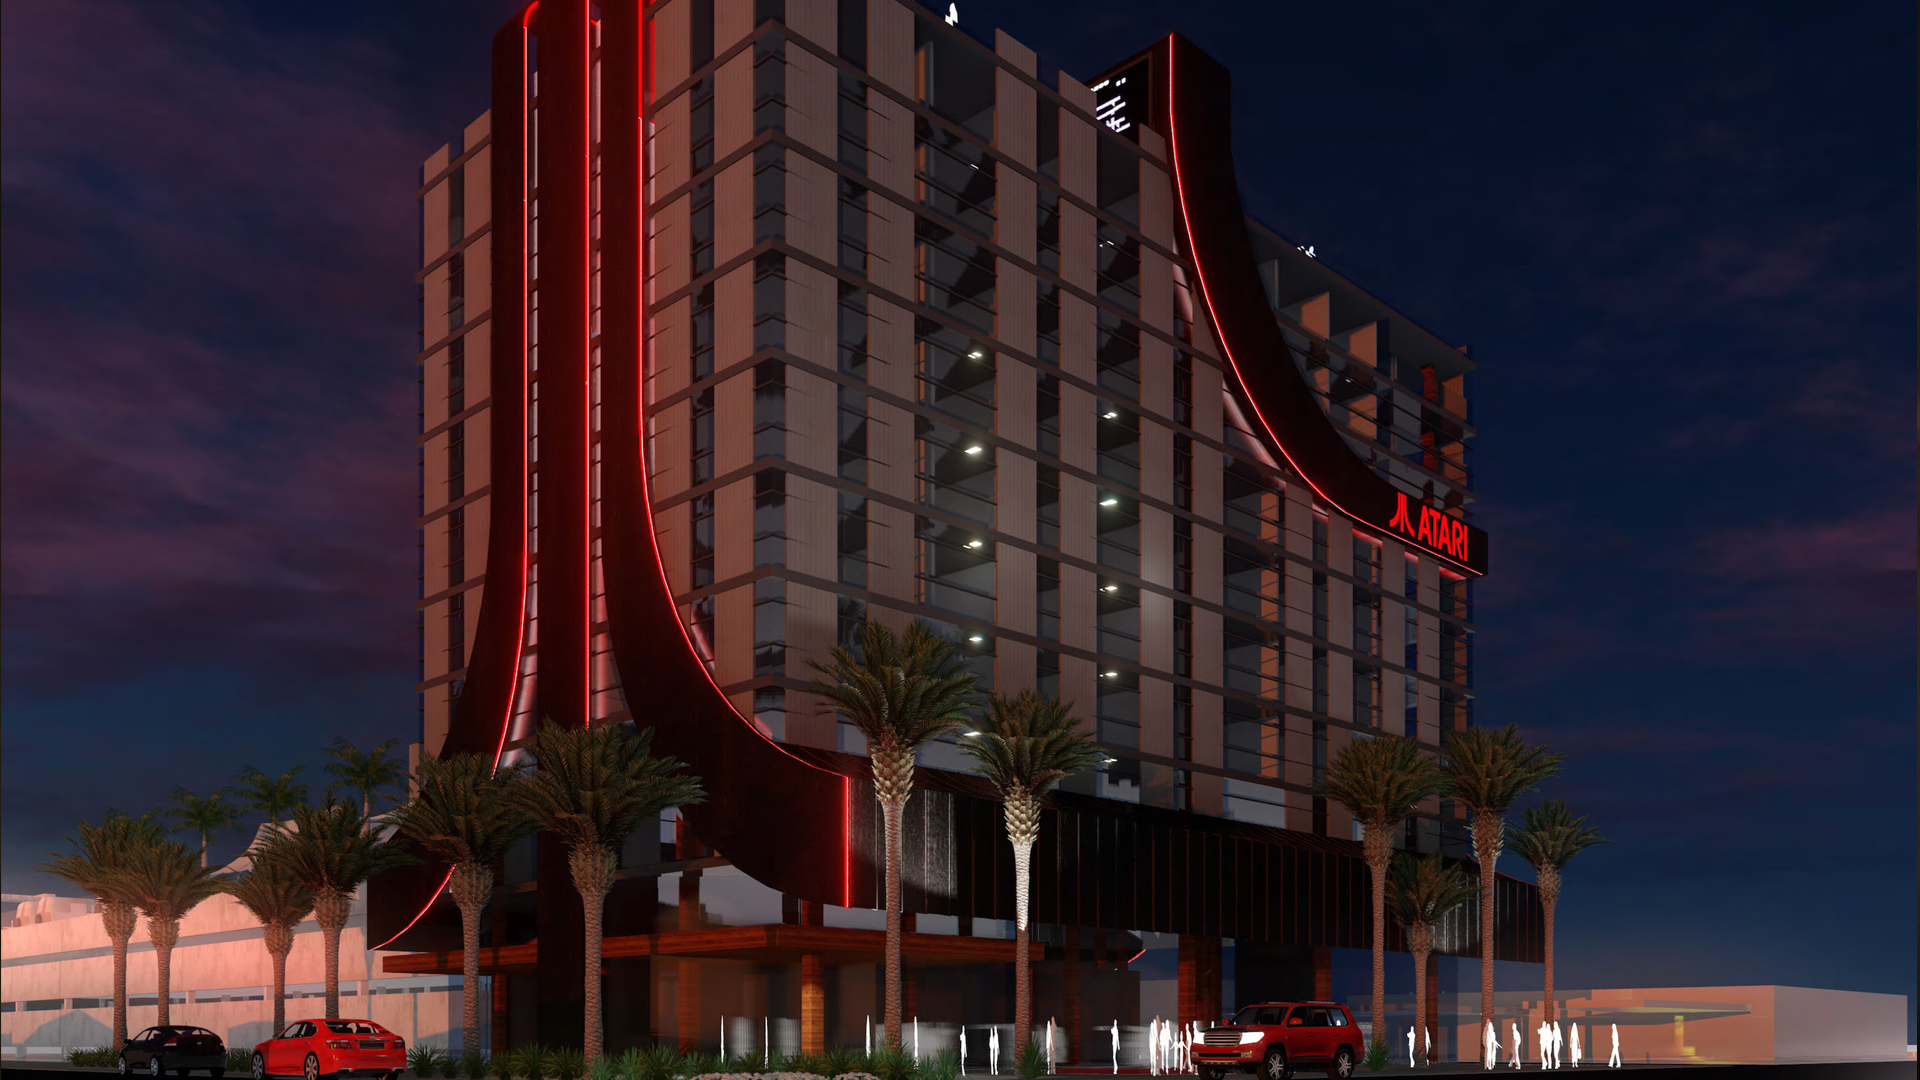 Episode 204 – Come Stay at the Atari Hotel!